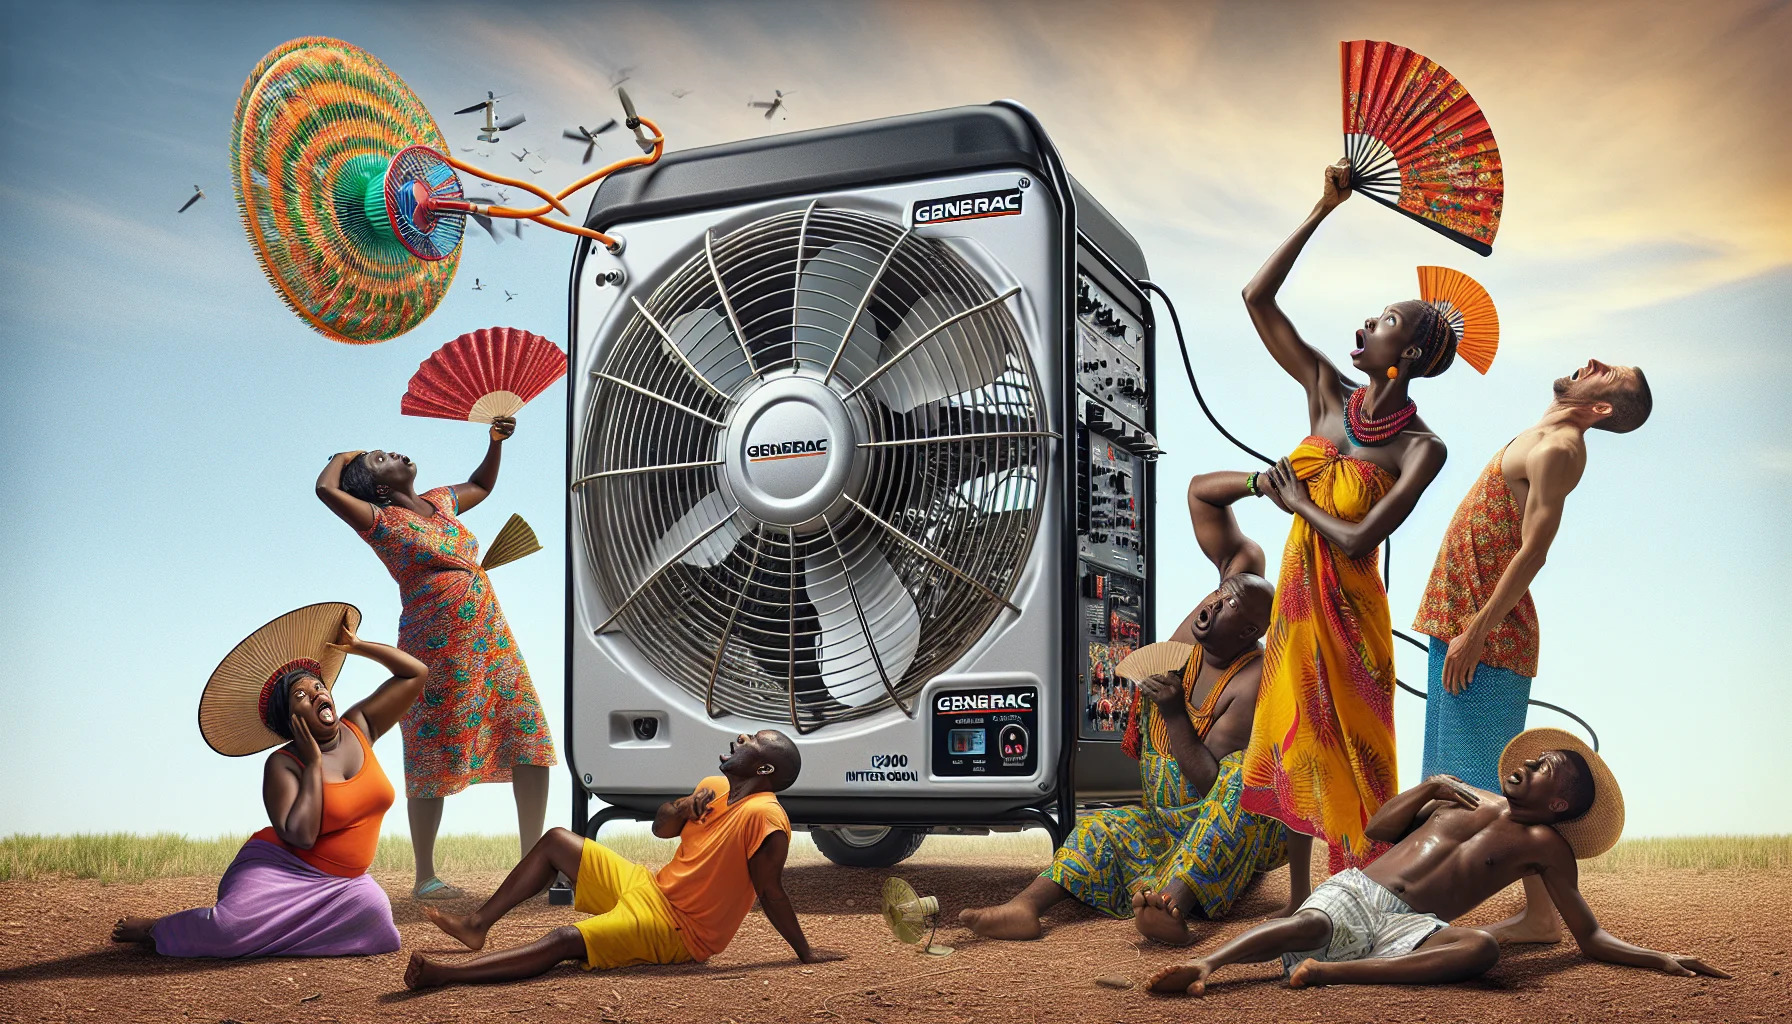 Create a humorous, realistic image featuring a Generac iX2000 inverter generator. The generator is at the centre of the scene, powering a hugely oversized retro desk fan in an open field. Nearby, a confused group of people, consisting of two African women, an Asian man, and a Caucasian man, all dressed in brightly coloured summer clothes, are fanning themselves with hand fans and looking at the gargantuan fan in astonishment. The image should cleverly engage the viewer, making them consider the potential of generating their own electricity in a fun and unique way.